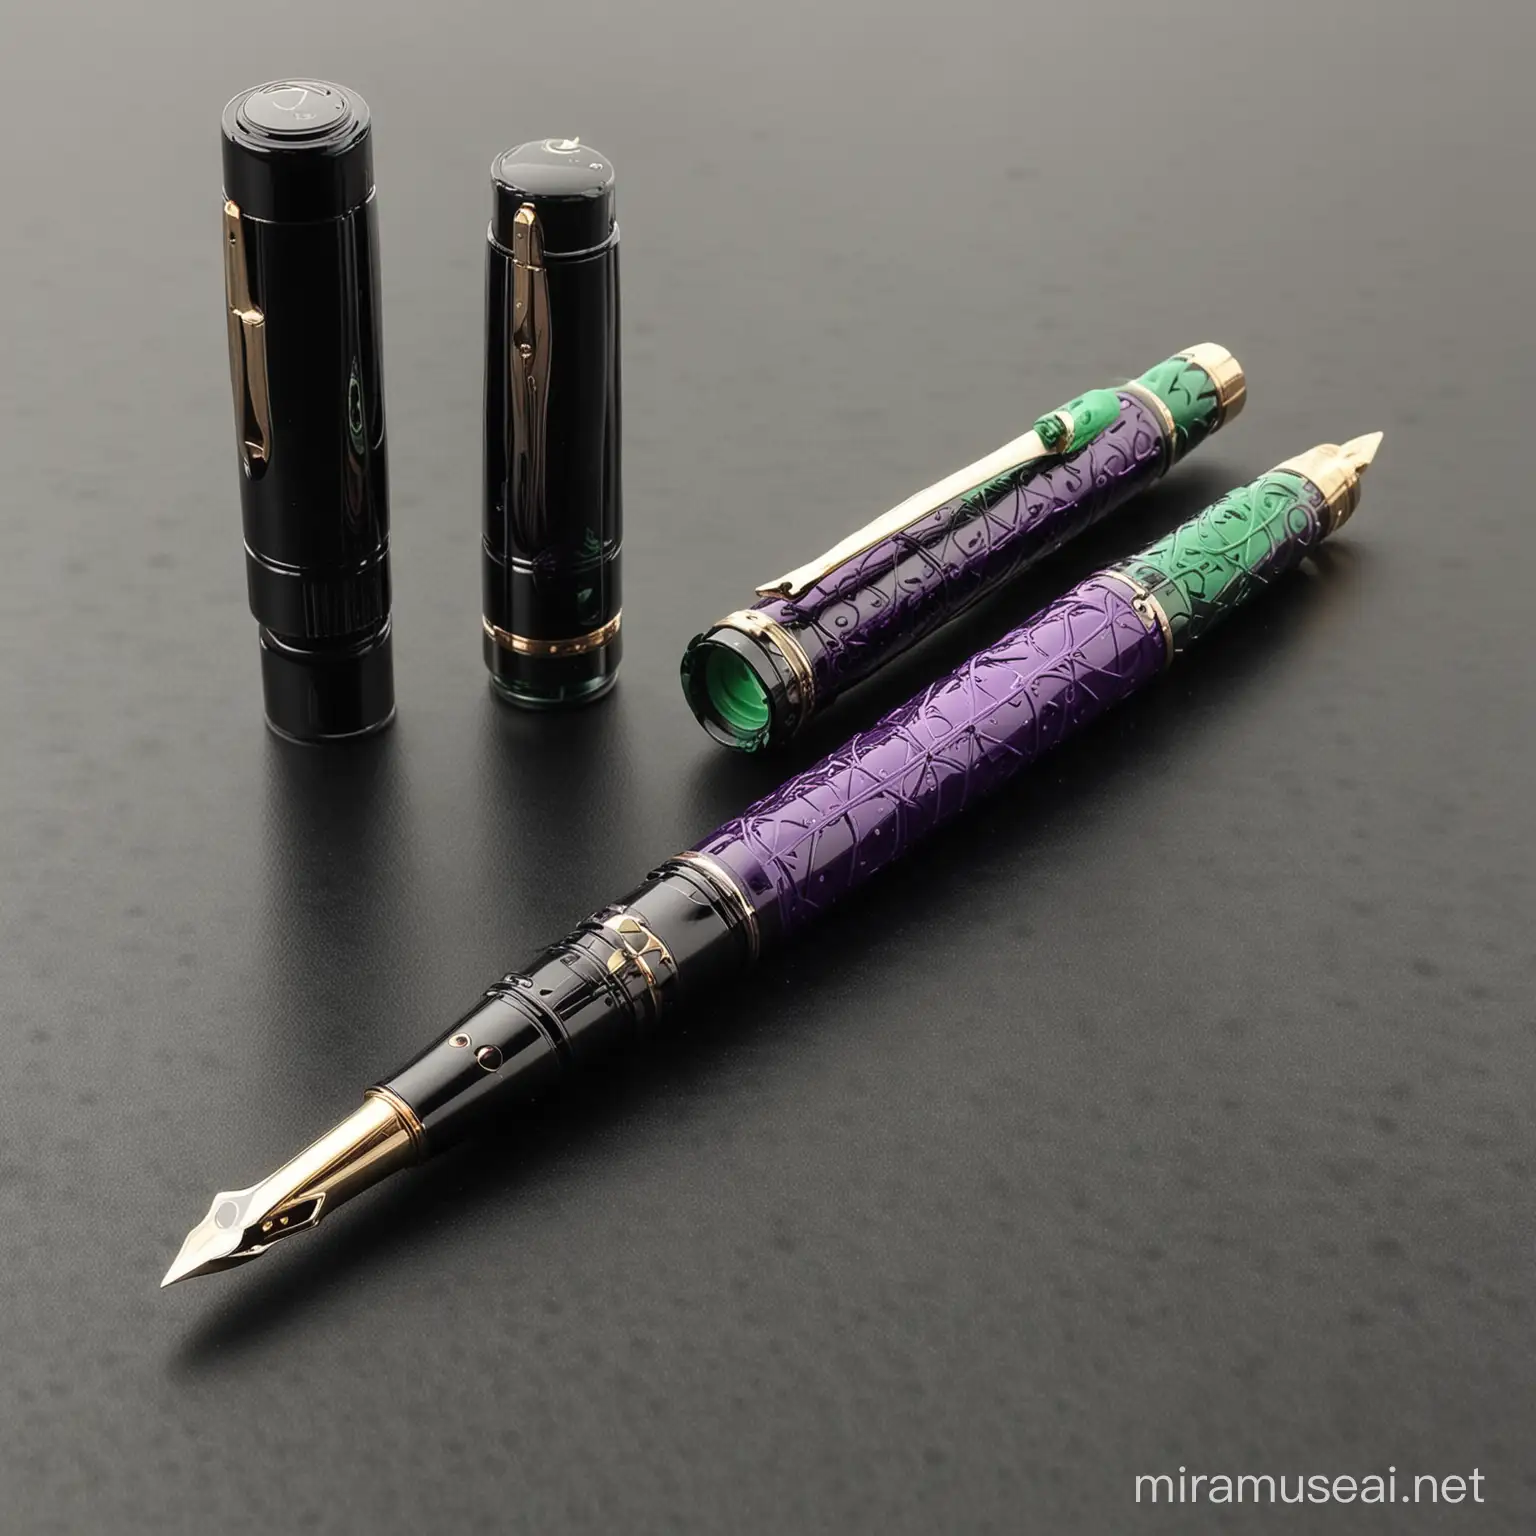 Eccentric Joker Style Fountain Pen Illustration with Quirky Colors